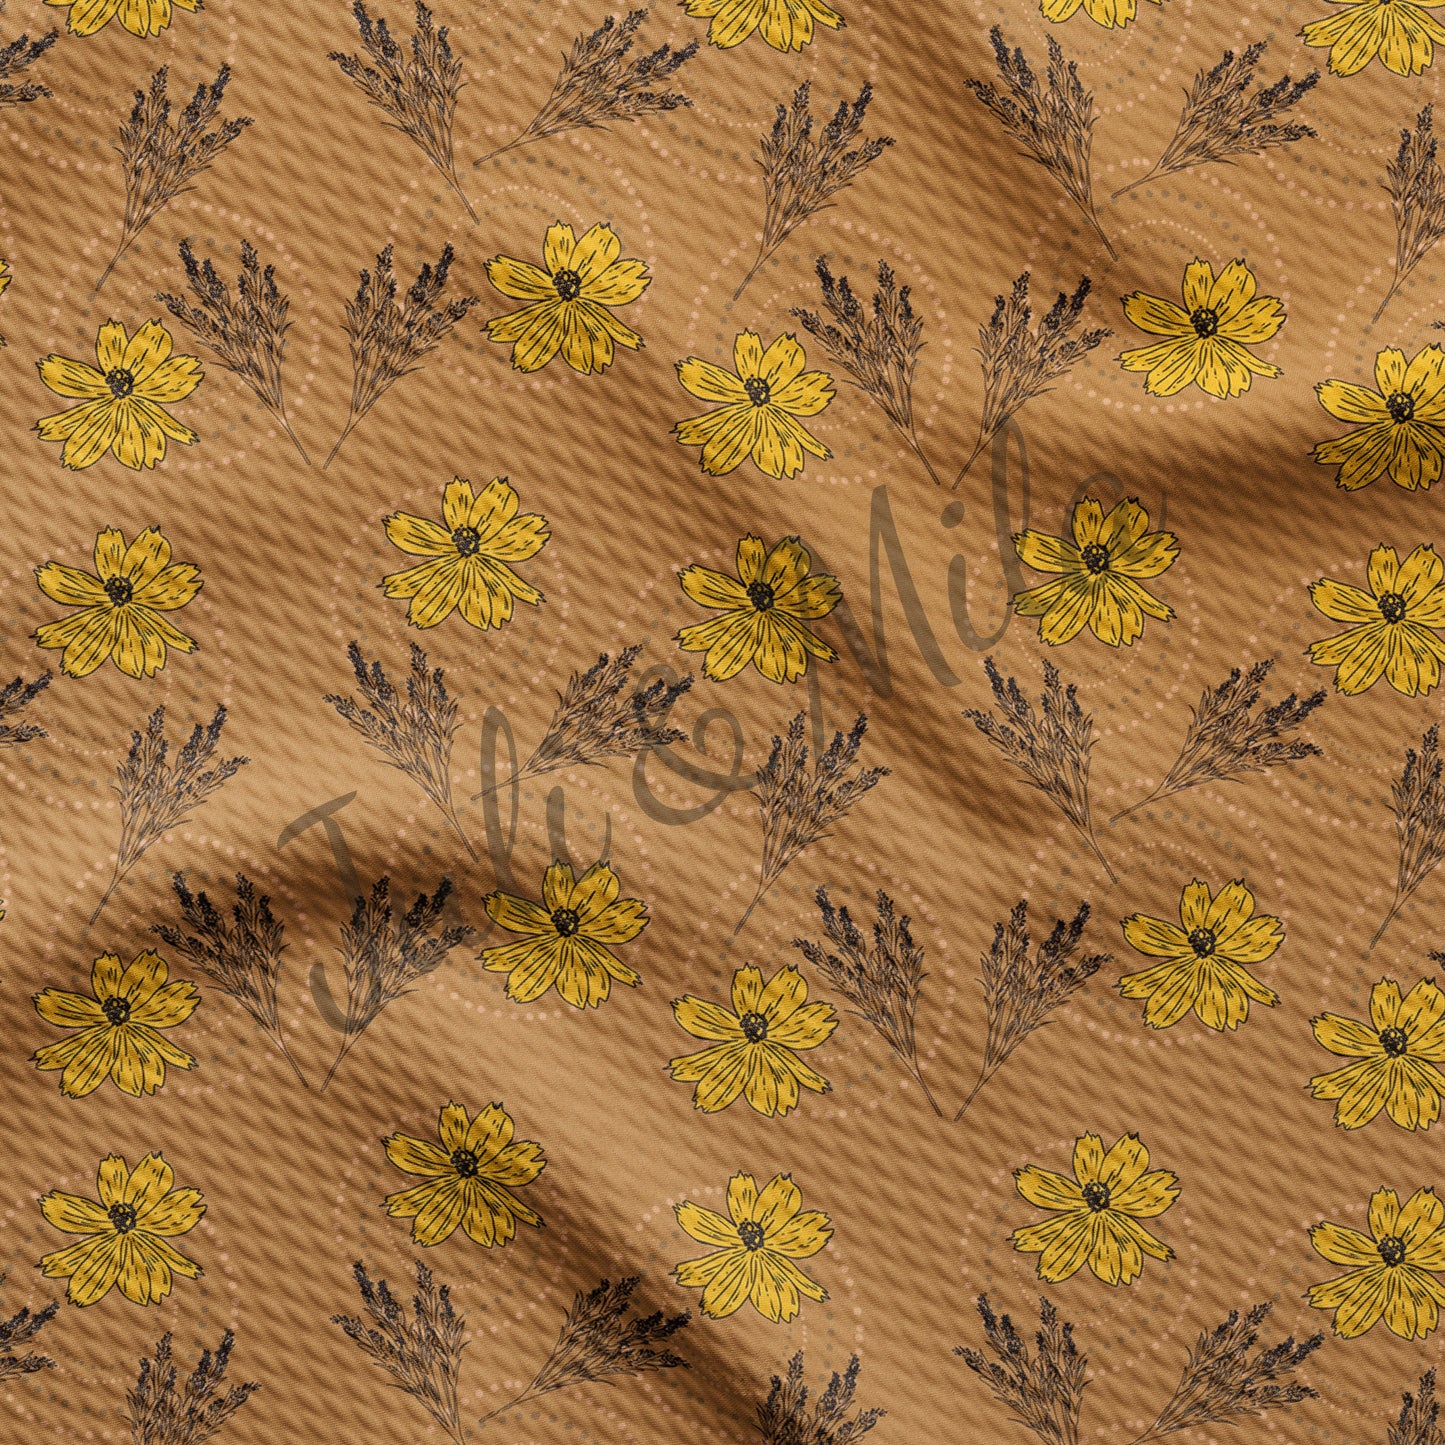 Bullet Textured Fabric (Floral49)